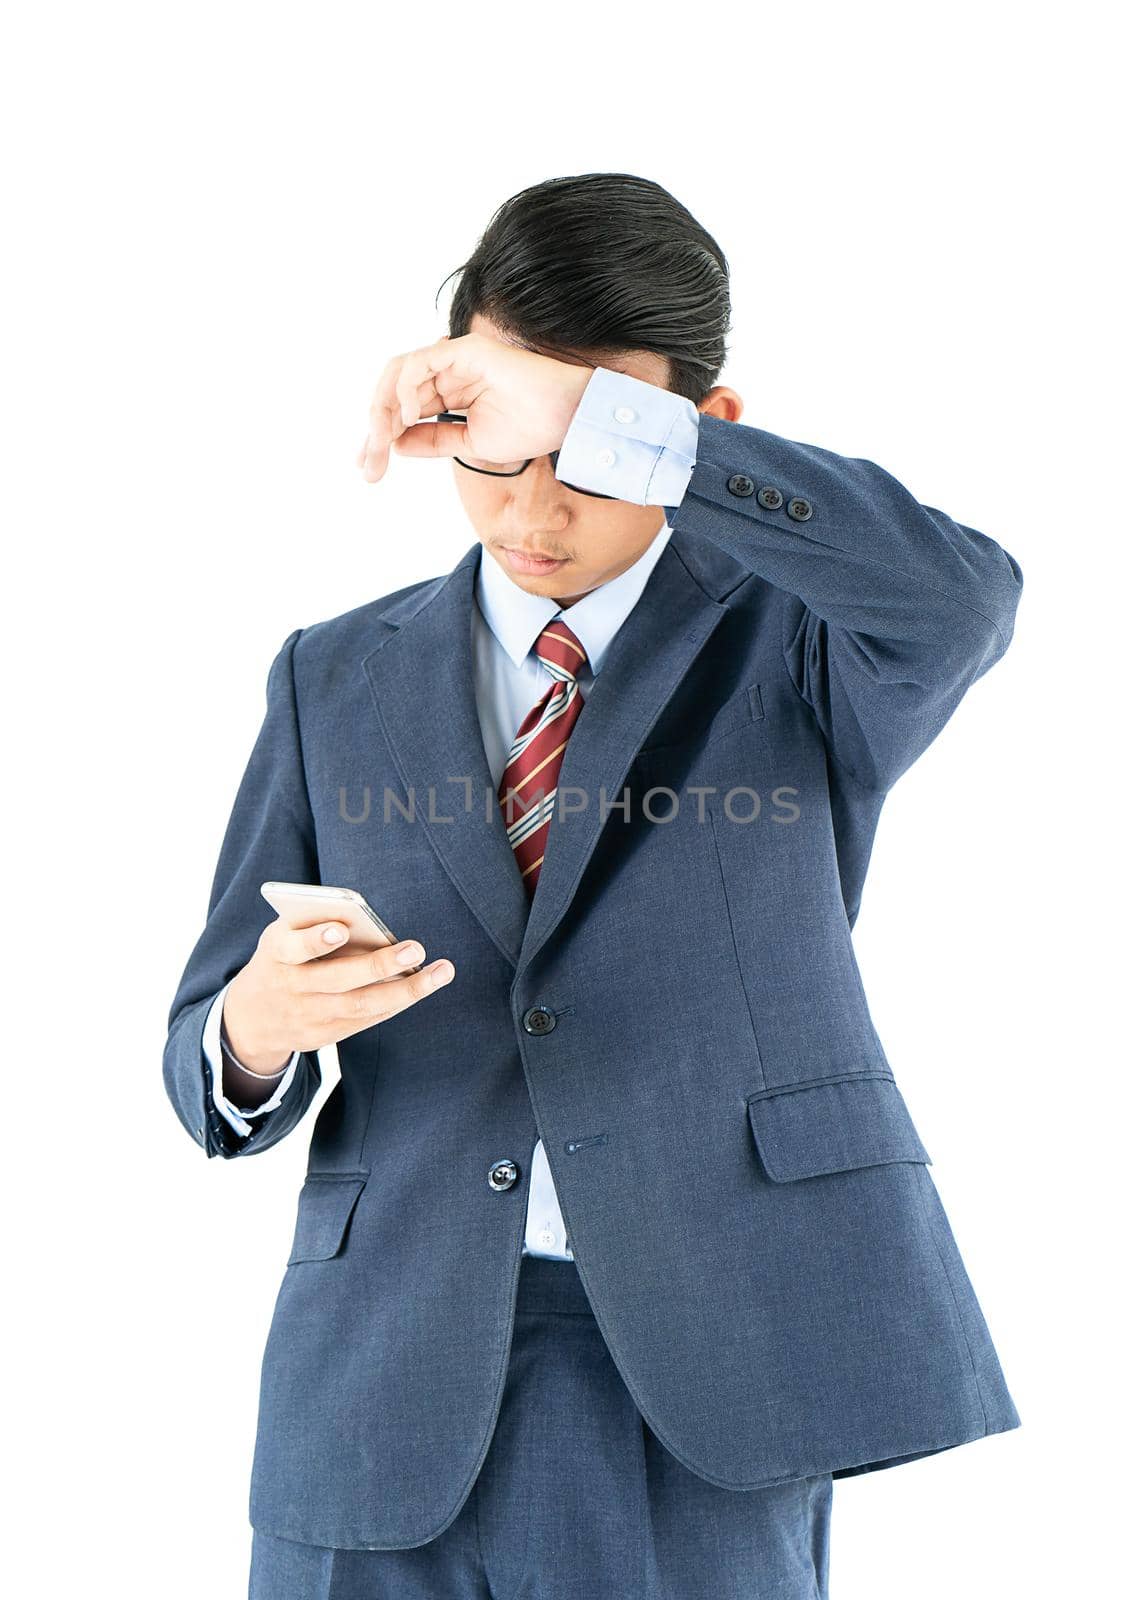 Businessman in suit holding smartphone by stoonn